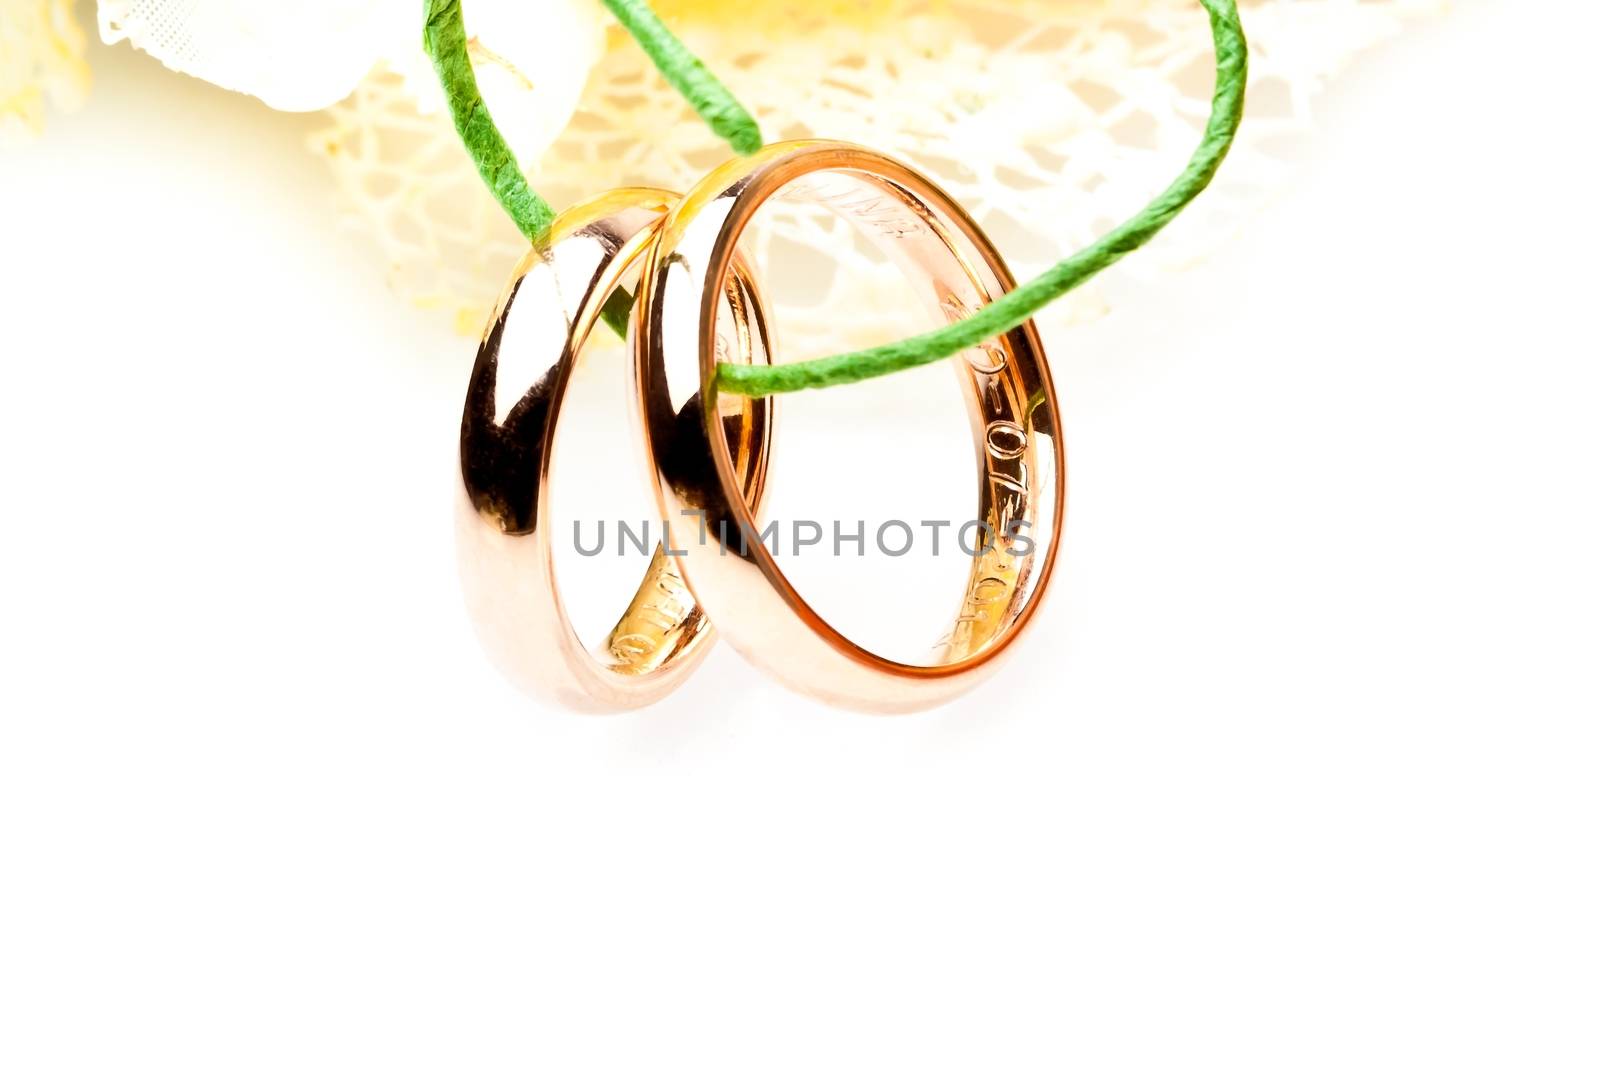 gold wedding rings near flowers with space for text by donfiore